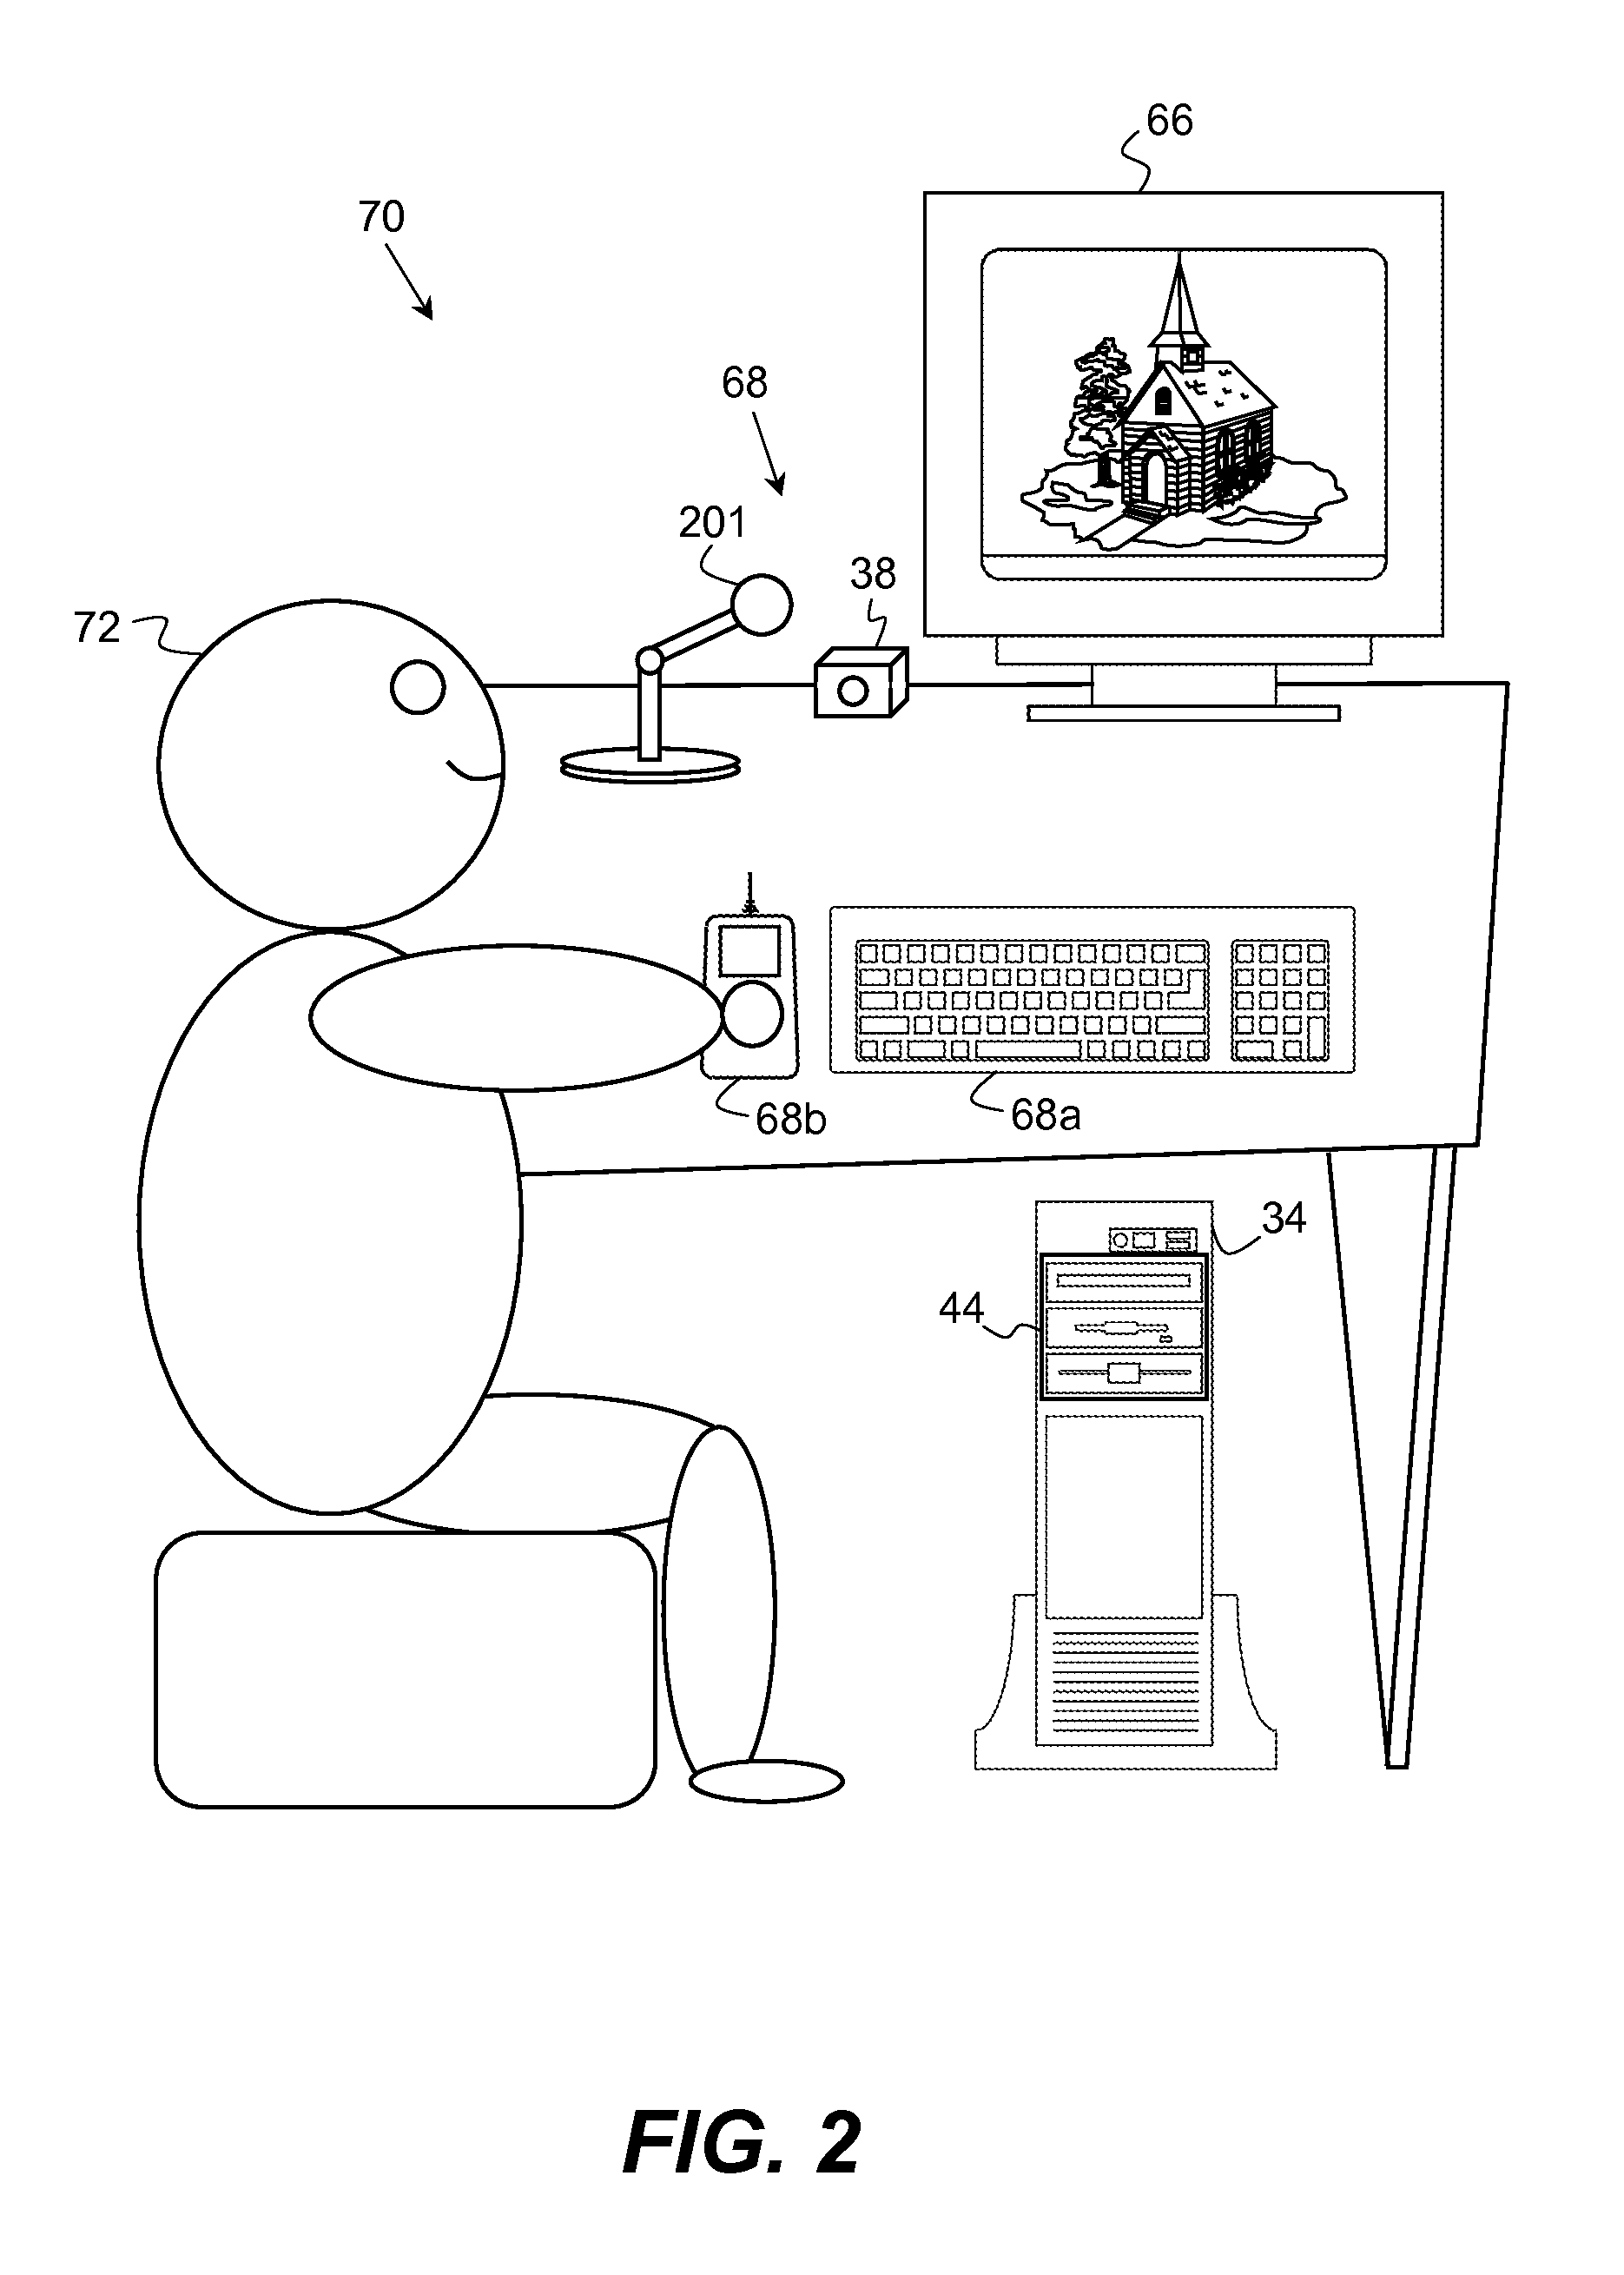 Method for producing artistic image template designs